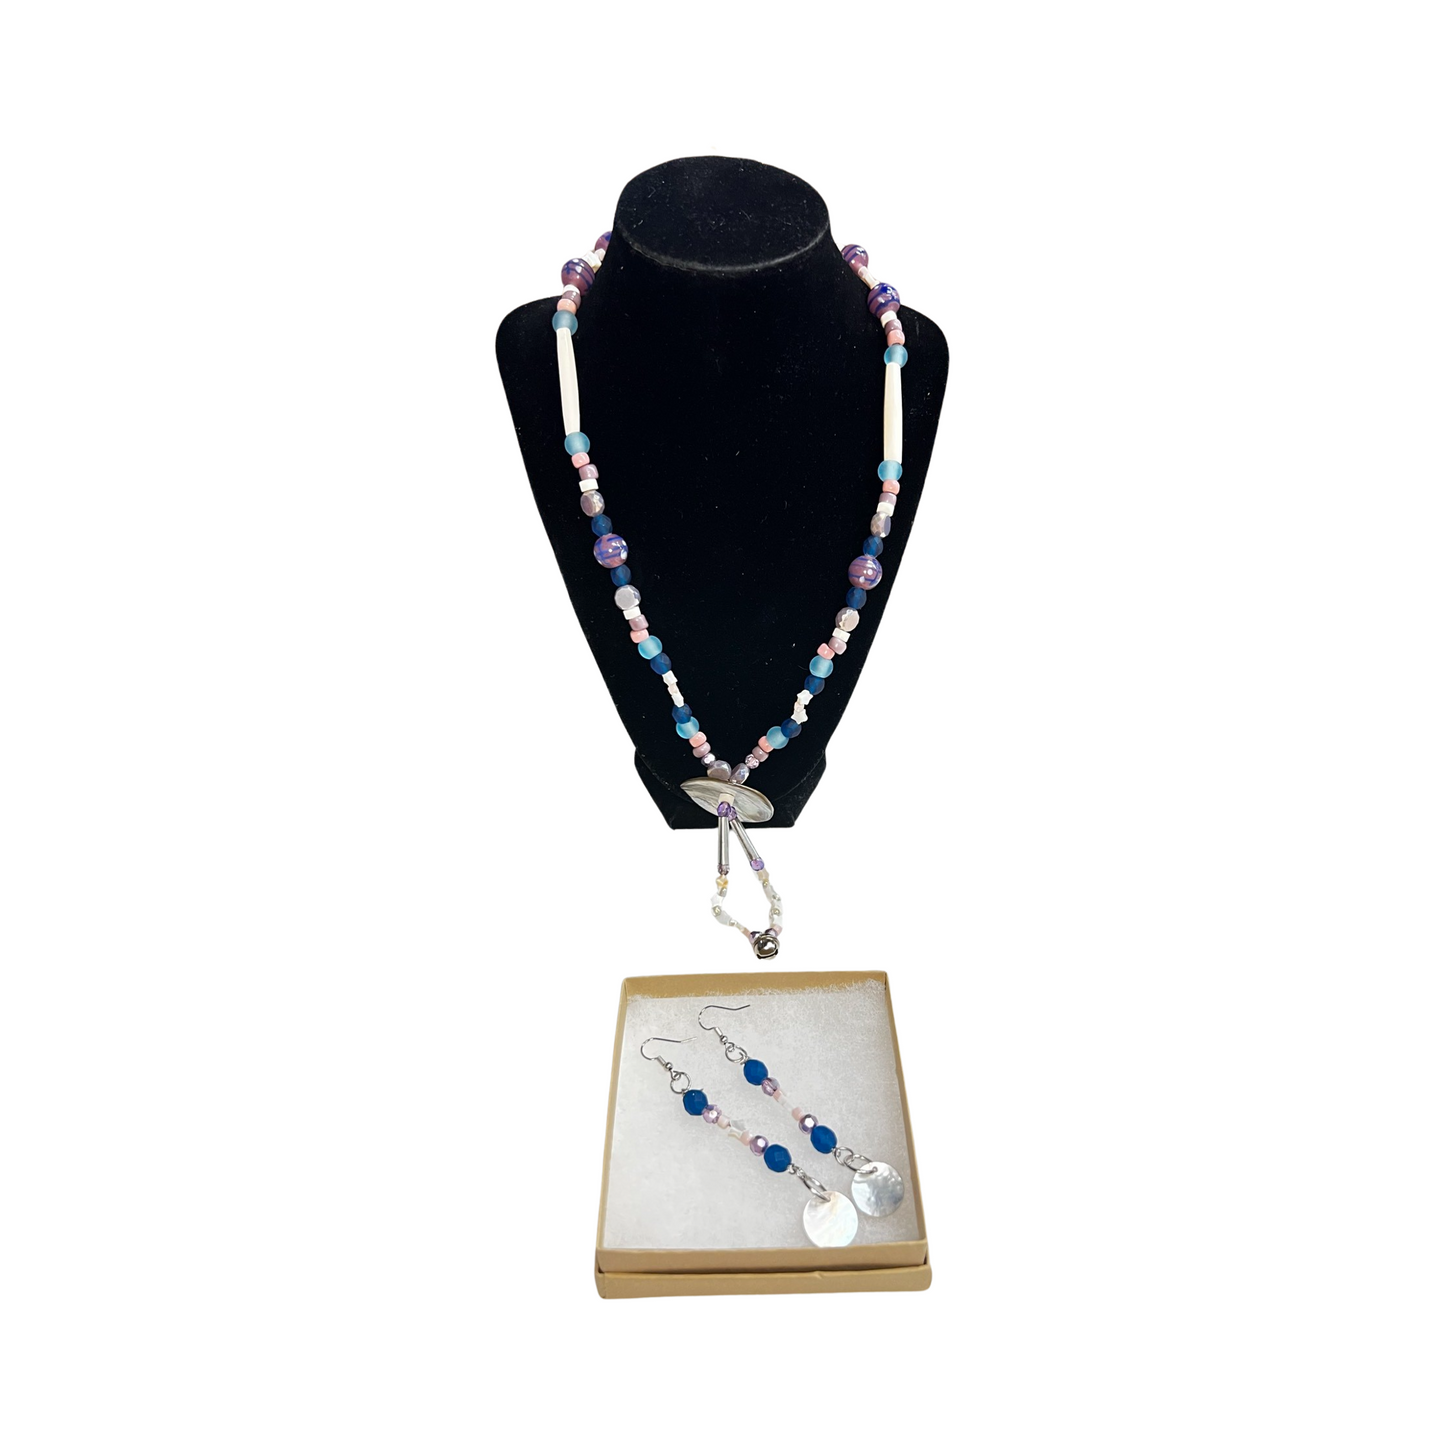 AM Necklace and Earrings Set